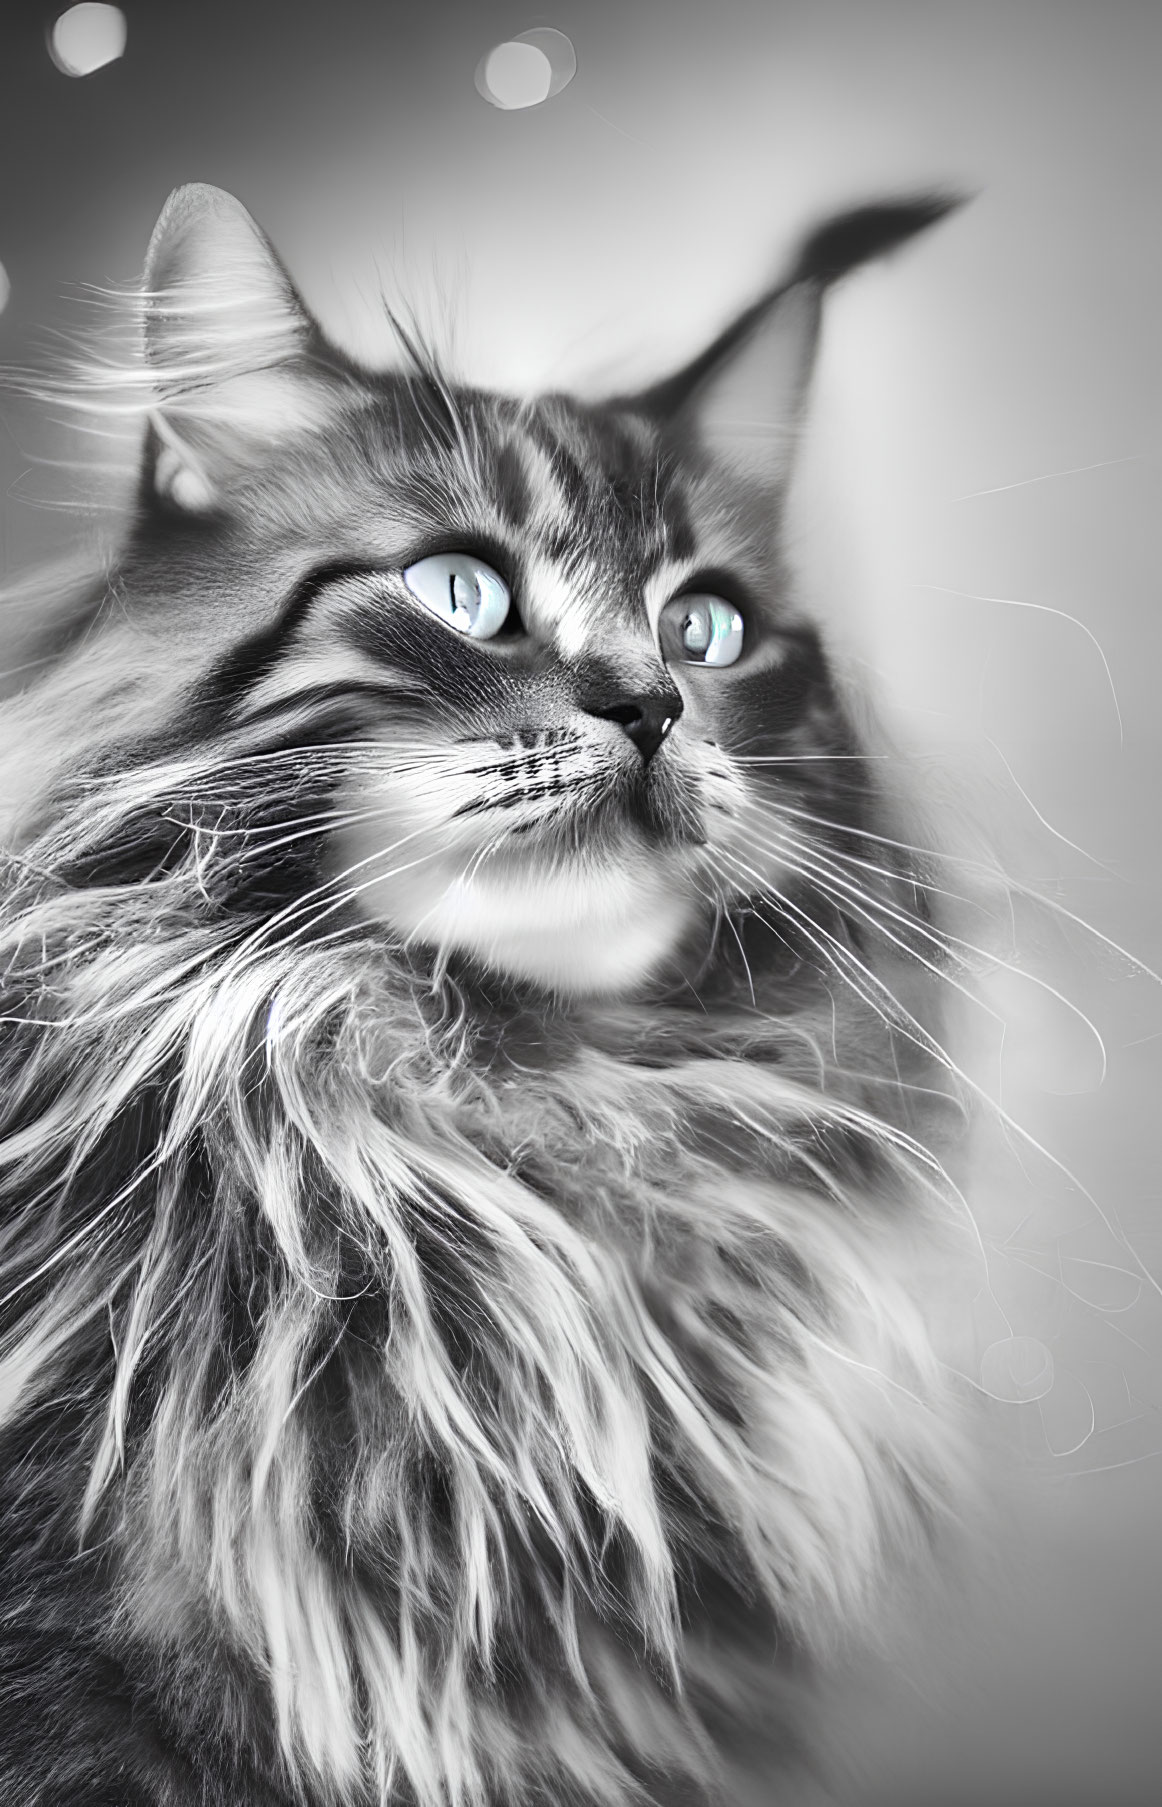 Fluffy cat with blue eyes and long whiskers in black and white.